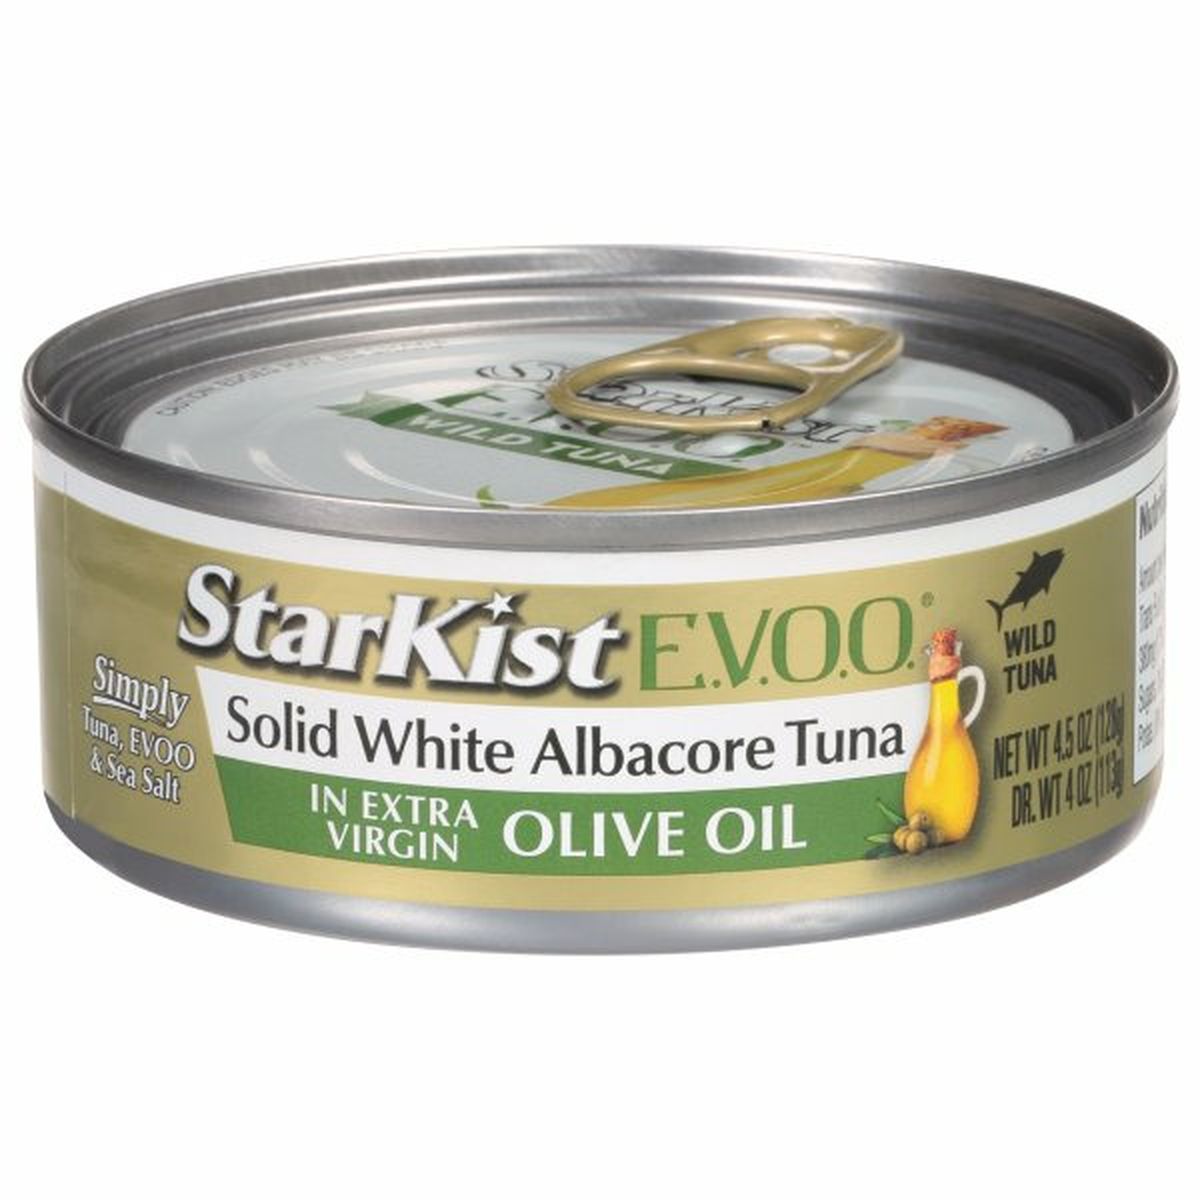 Calories in StarKist Tuna, Albacore, Solid White, in Extra Virgin Olive Oil